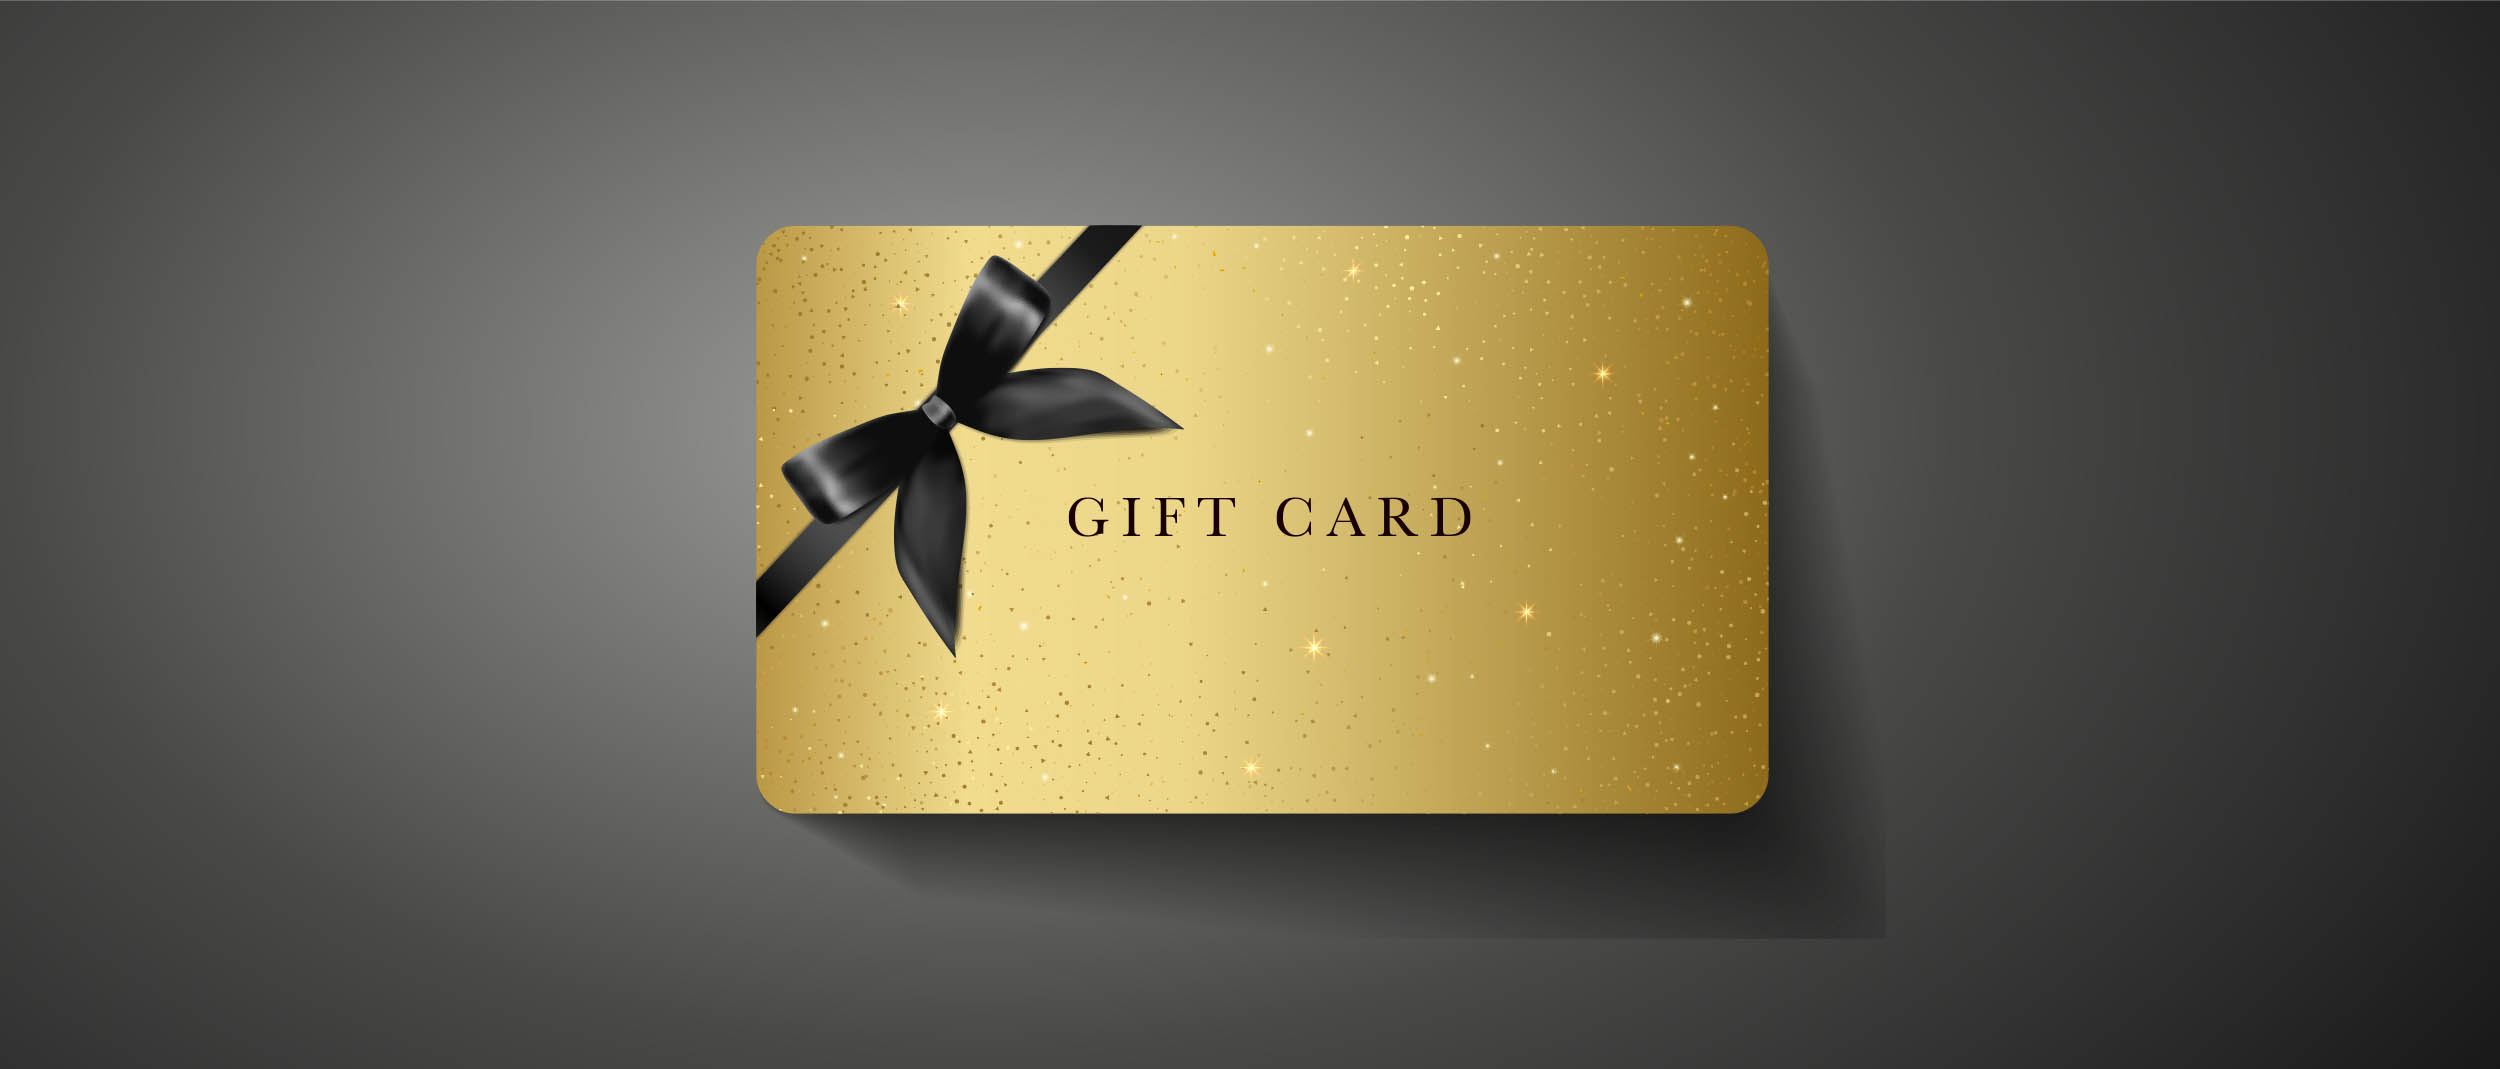 ’Tis the Season to Spot and Avoid Gift Card Scams